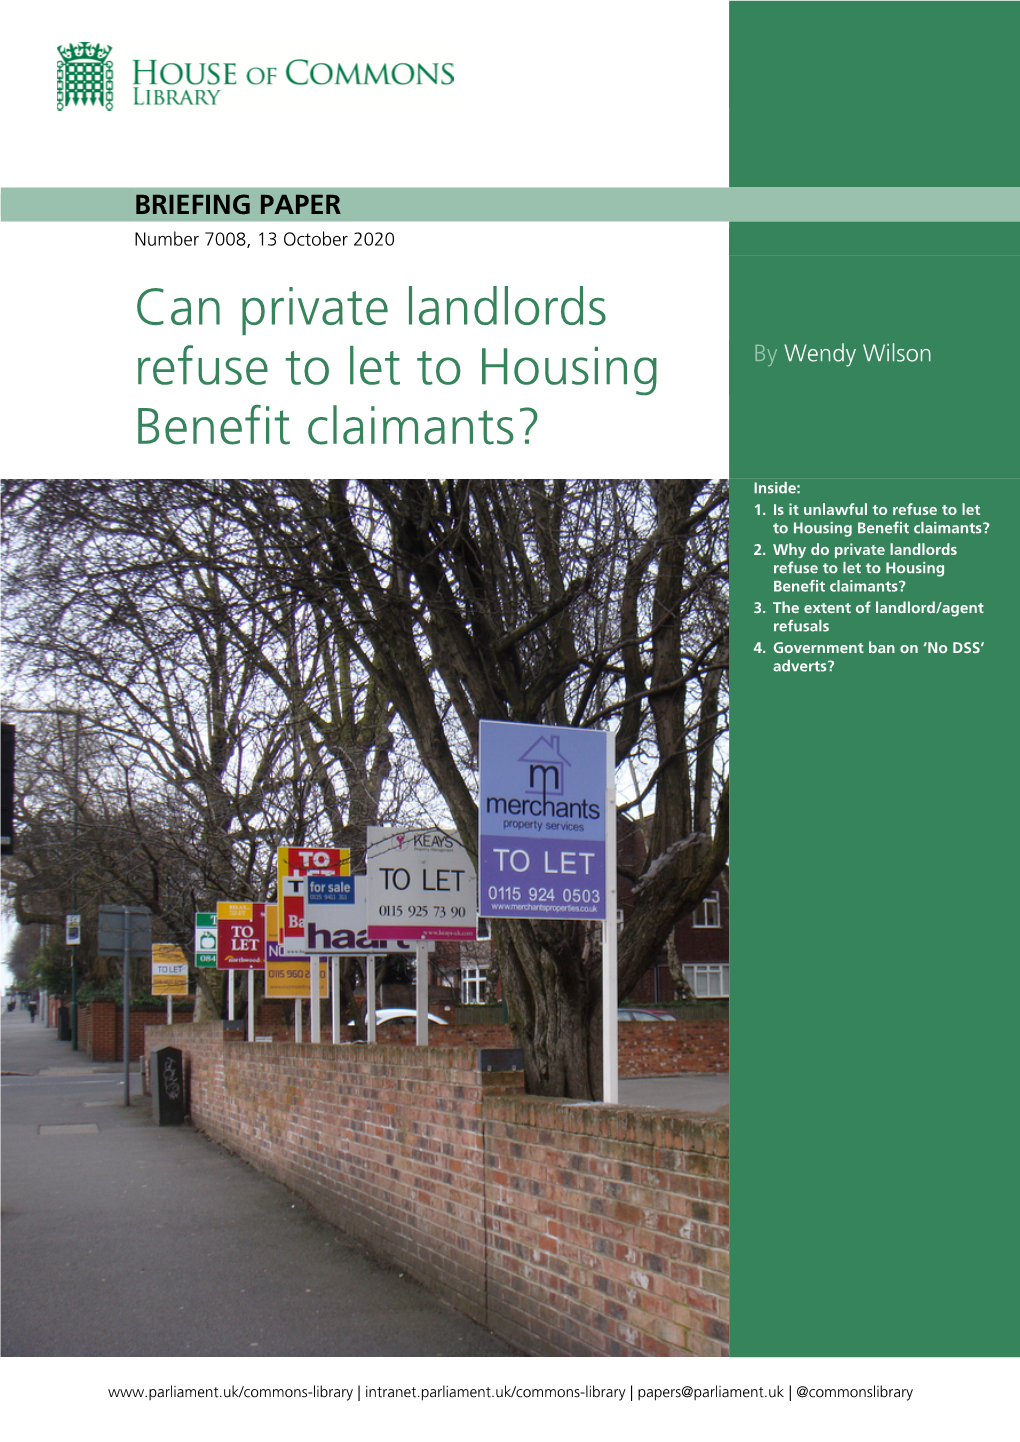 Can Private Landlords Refuse to Let to Housing Benefit Claimants?